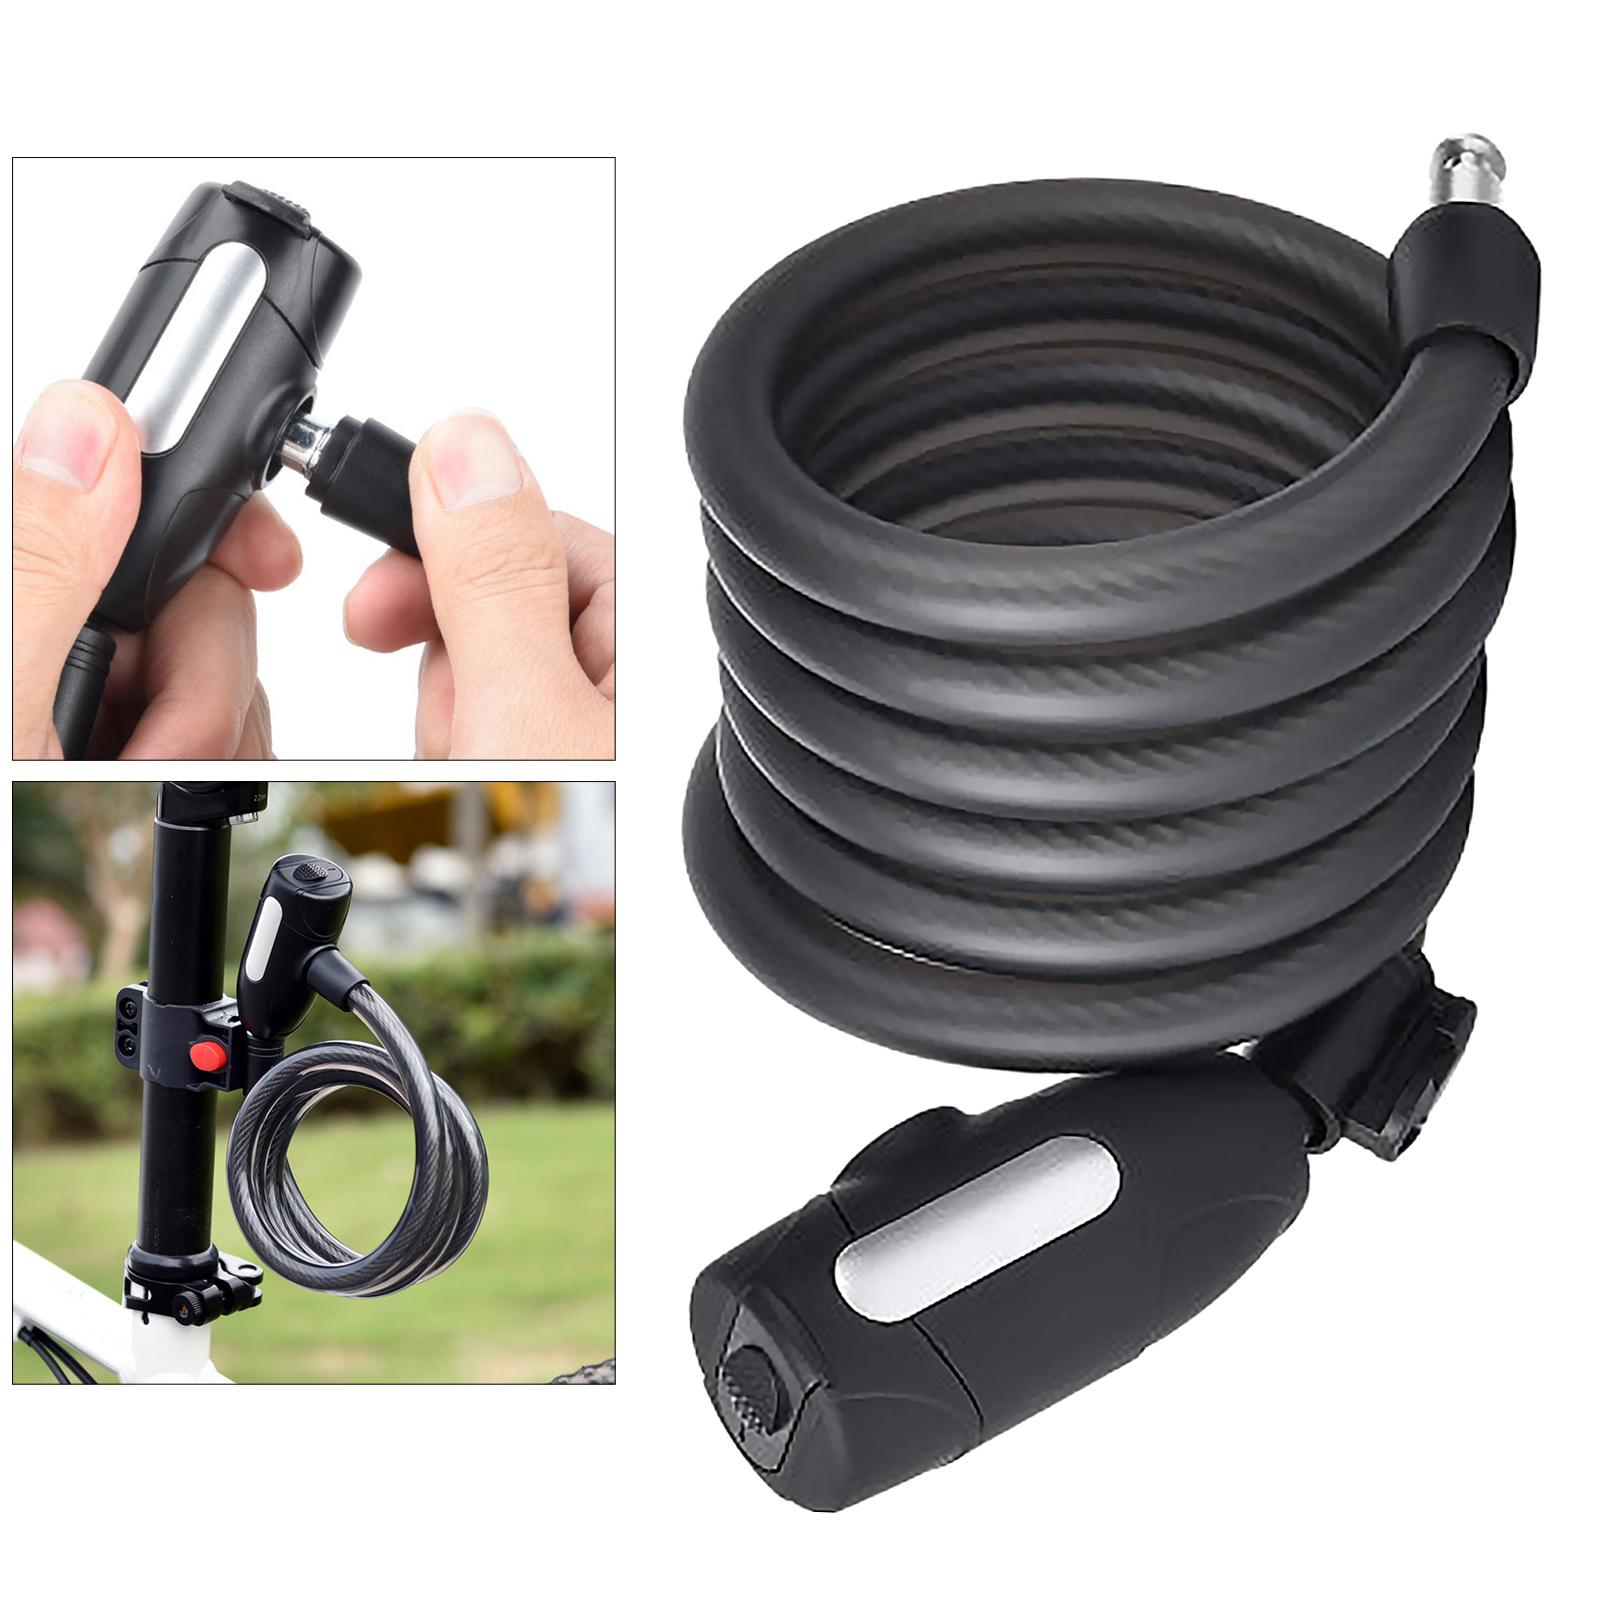 Bike Lock Bicycle Spiral Electric Fixed Anti-Theft Steel Chain Cable Locks 1.8m